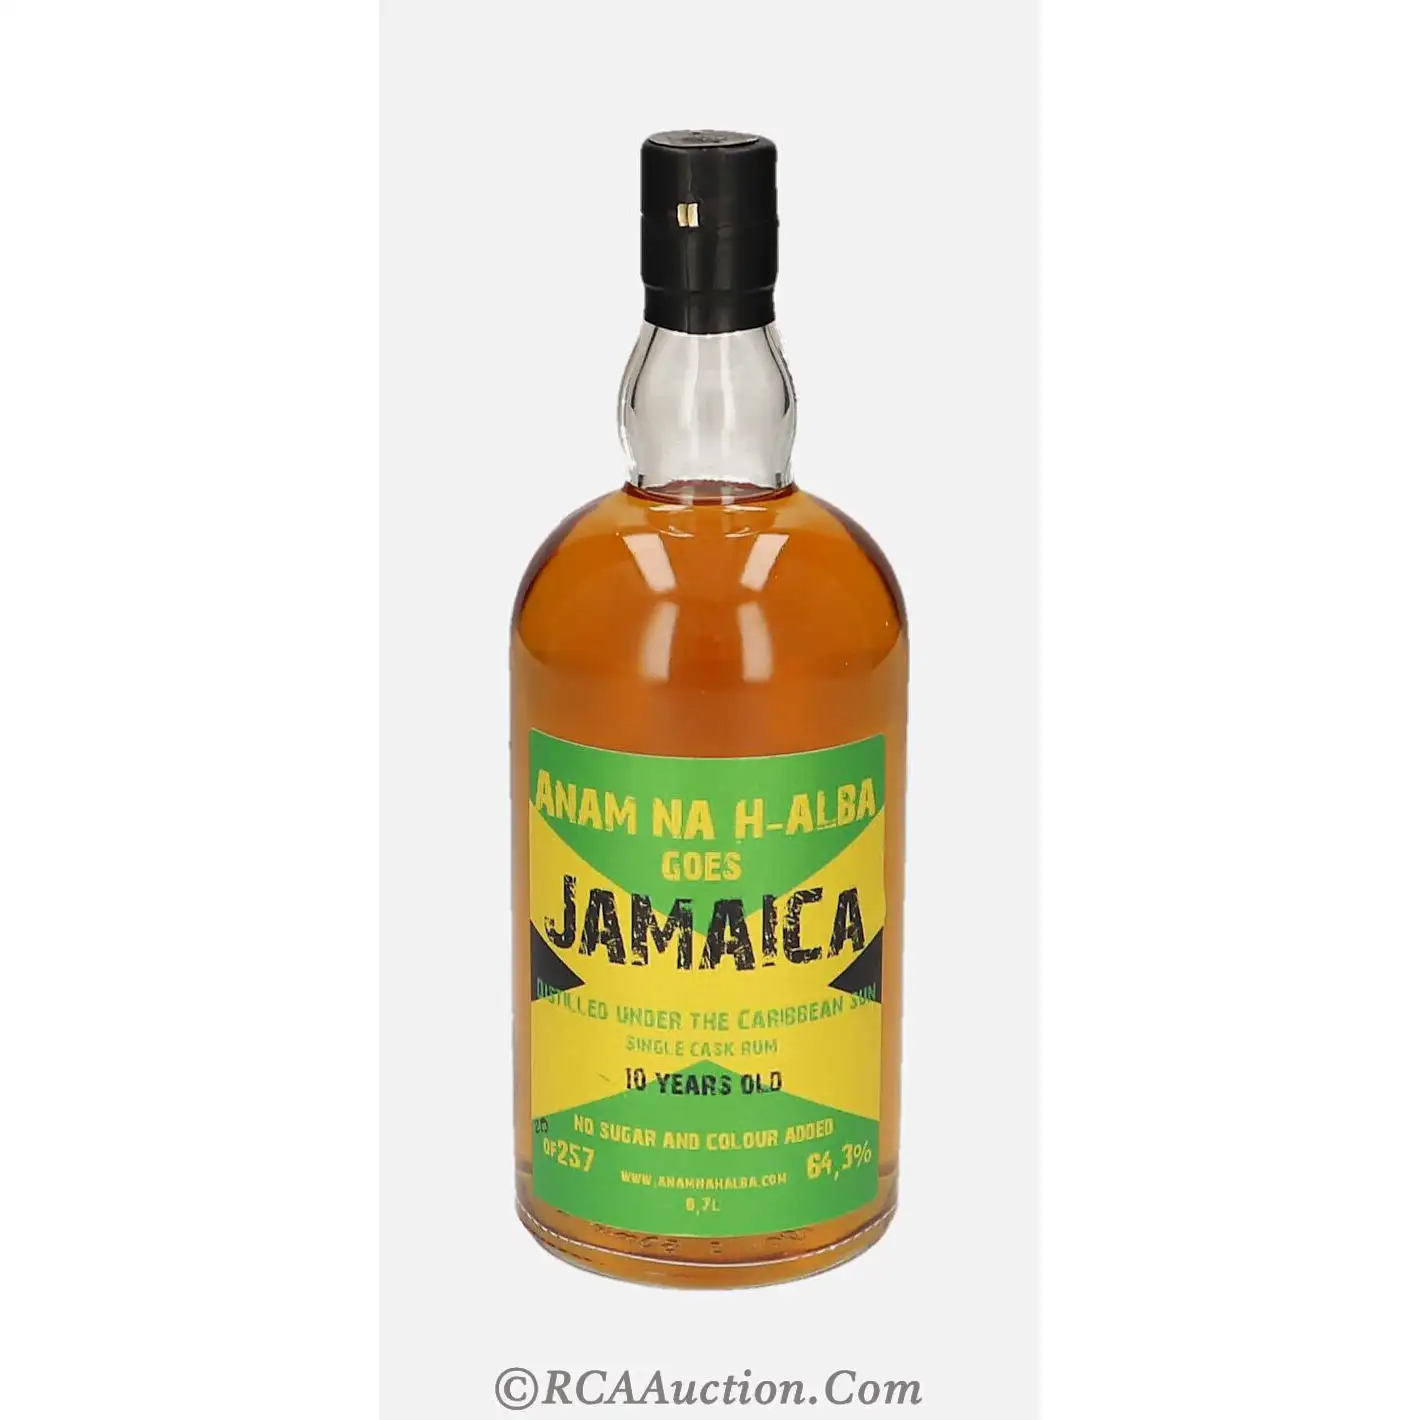 Image of the front of the bottle of the rum Jamaica